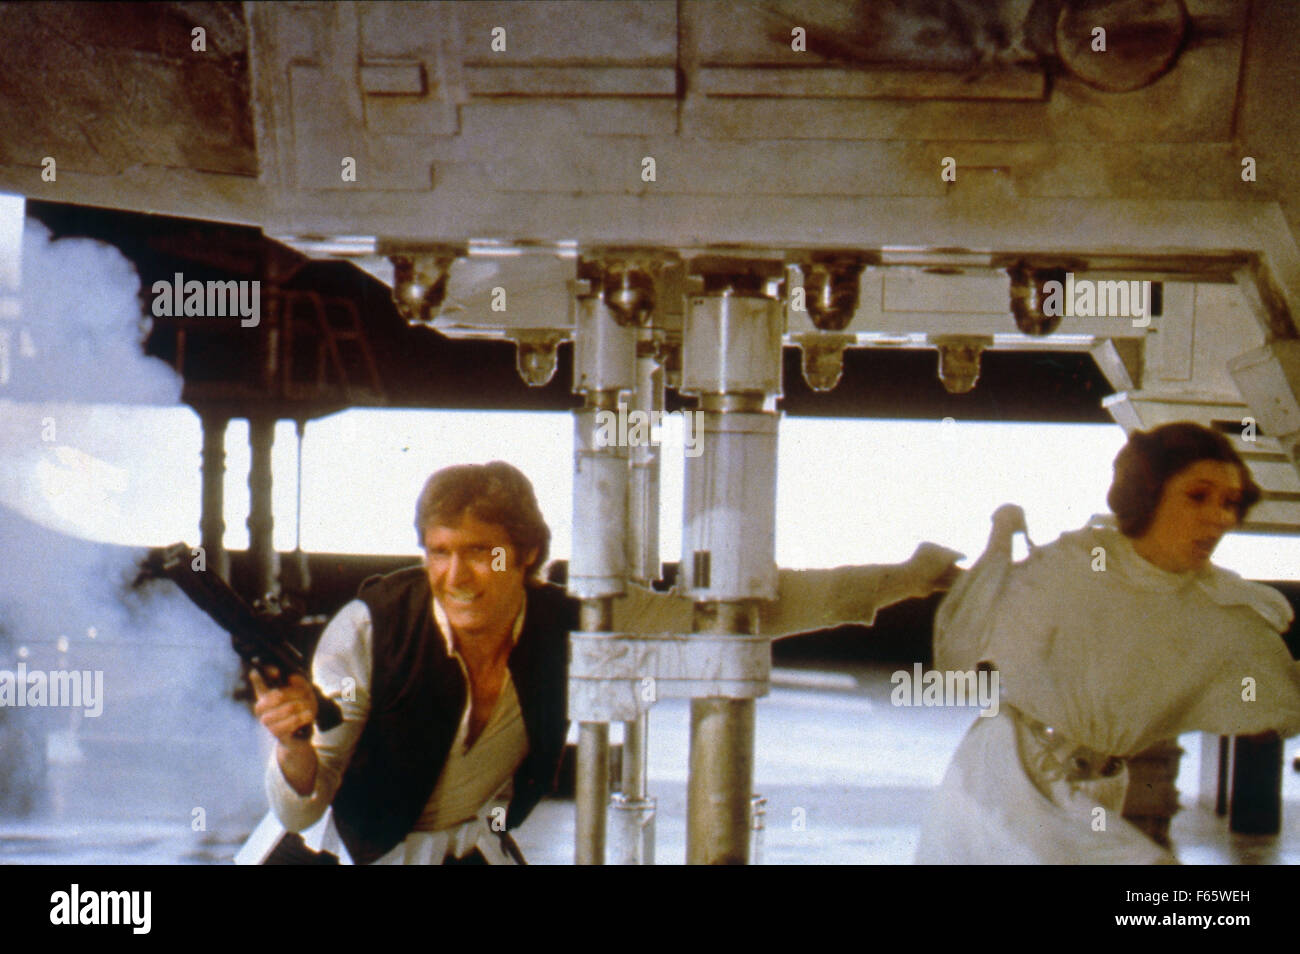 Star Wars: Episode IV - A New Hope Year: 1977 USA Director: George Lucas Harrison Ford, Carrie Fisher Stock Photo